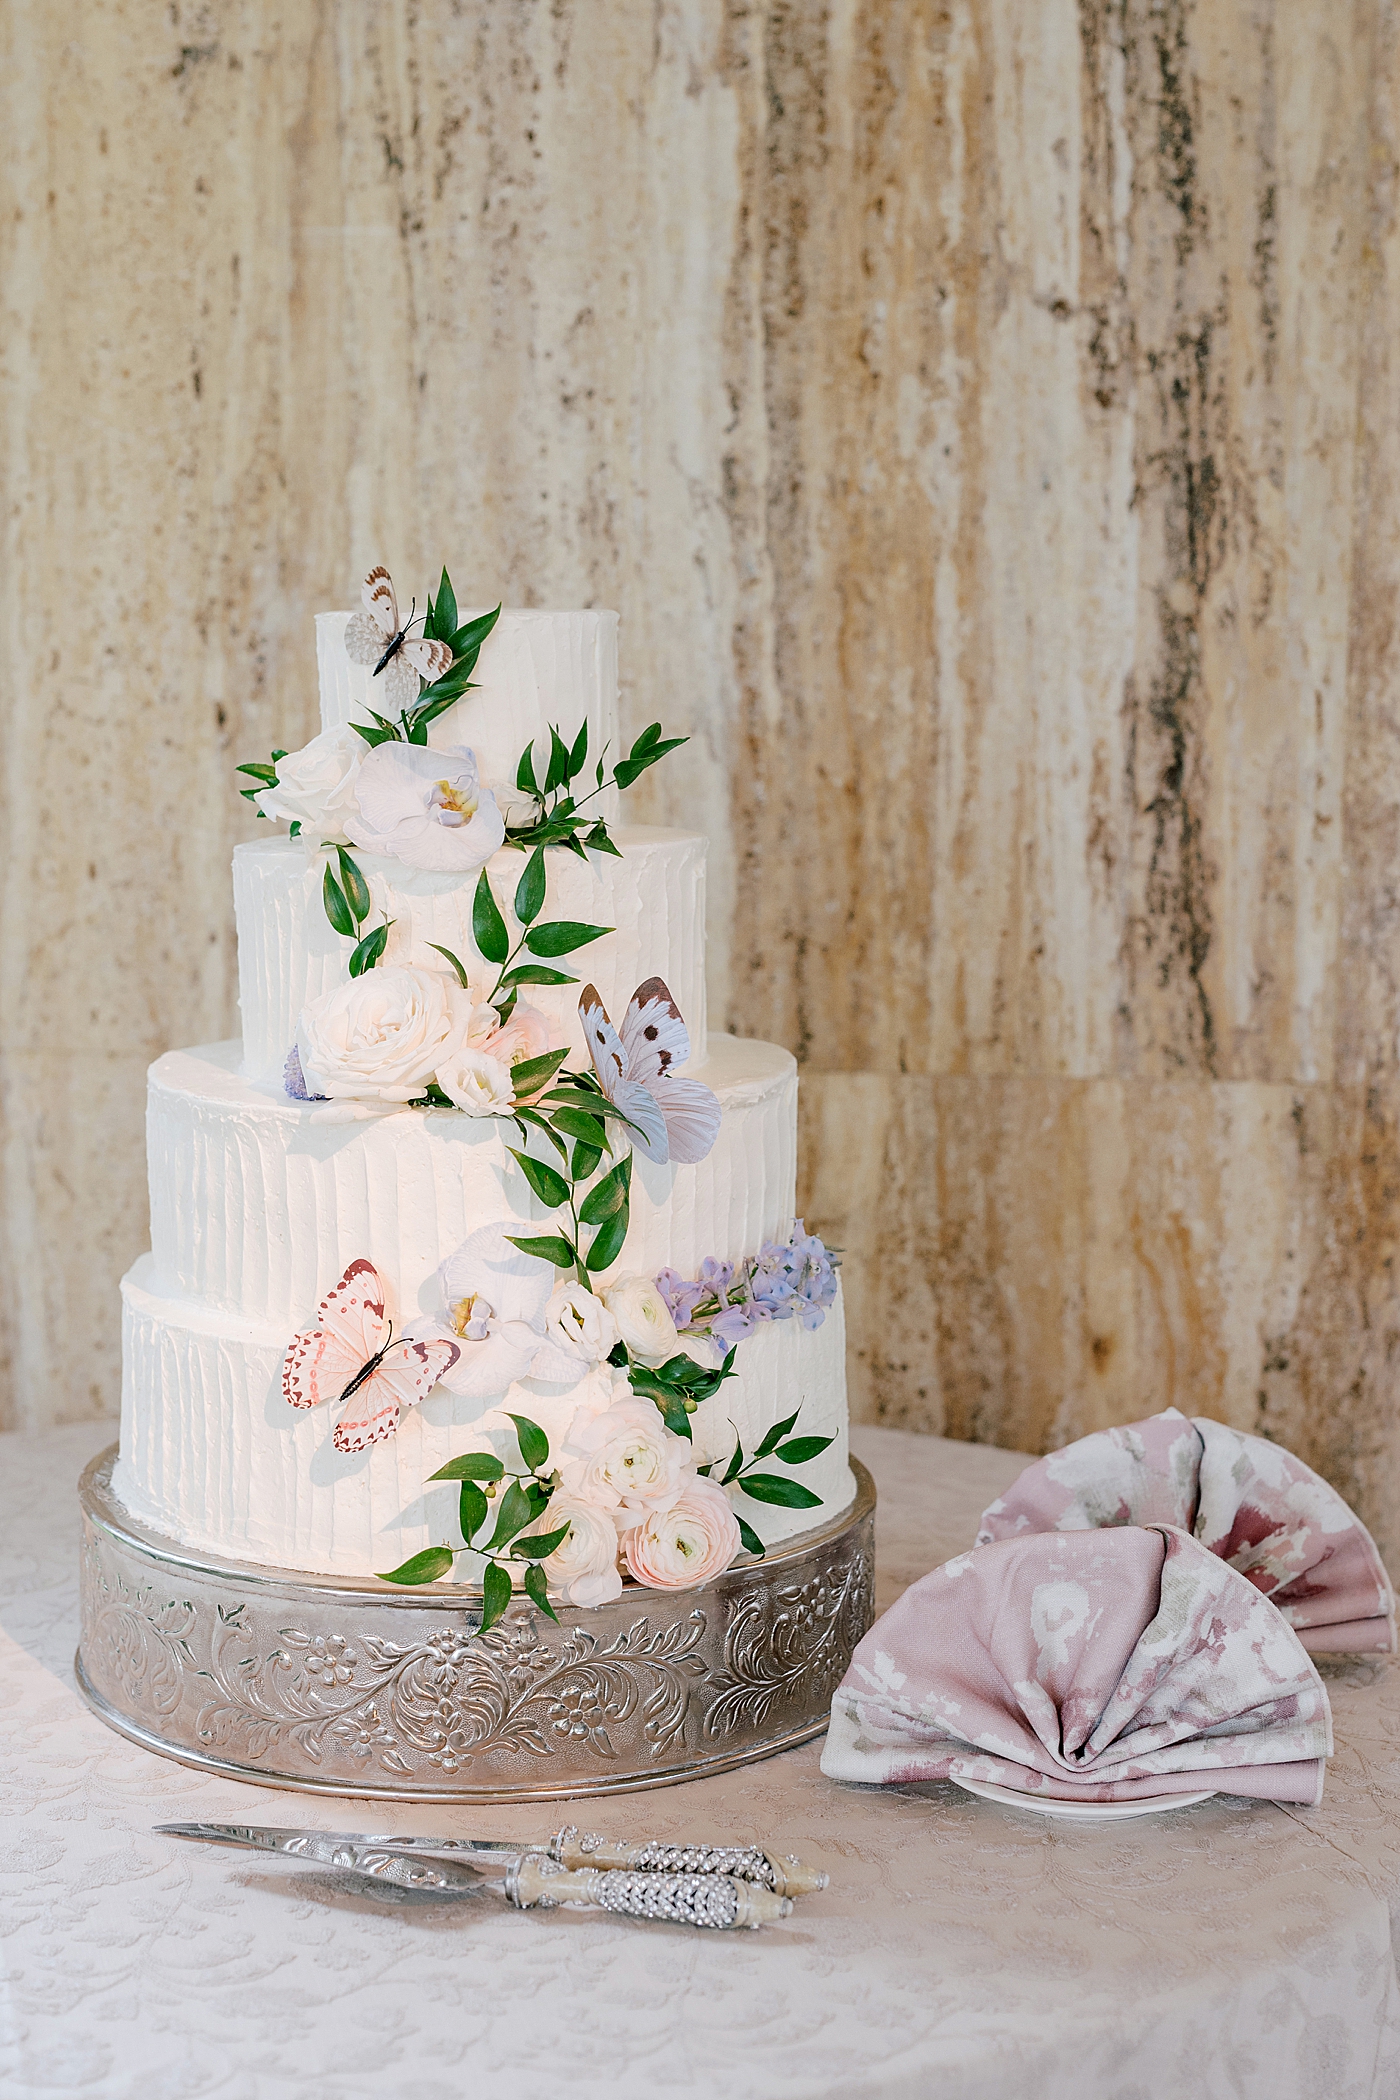 Wedding cake with flowers and butterflies | Image by Hope Helmuth Photography